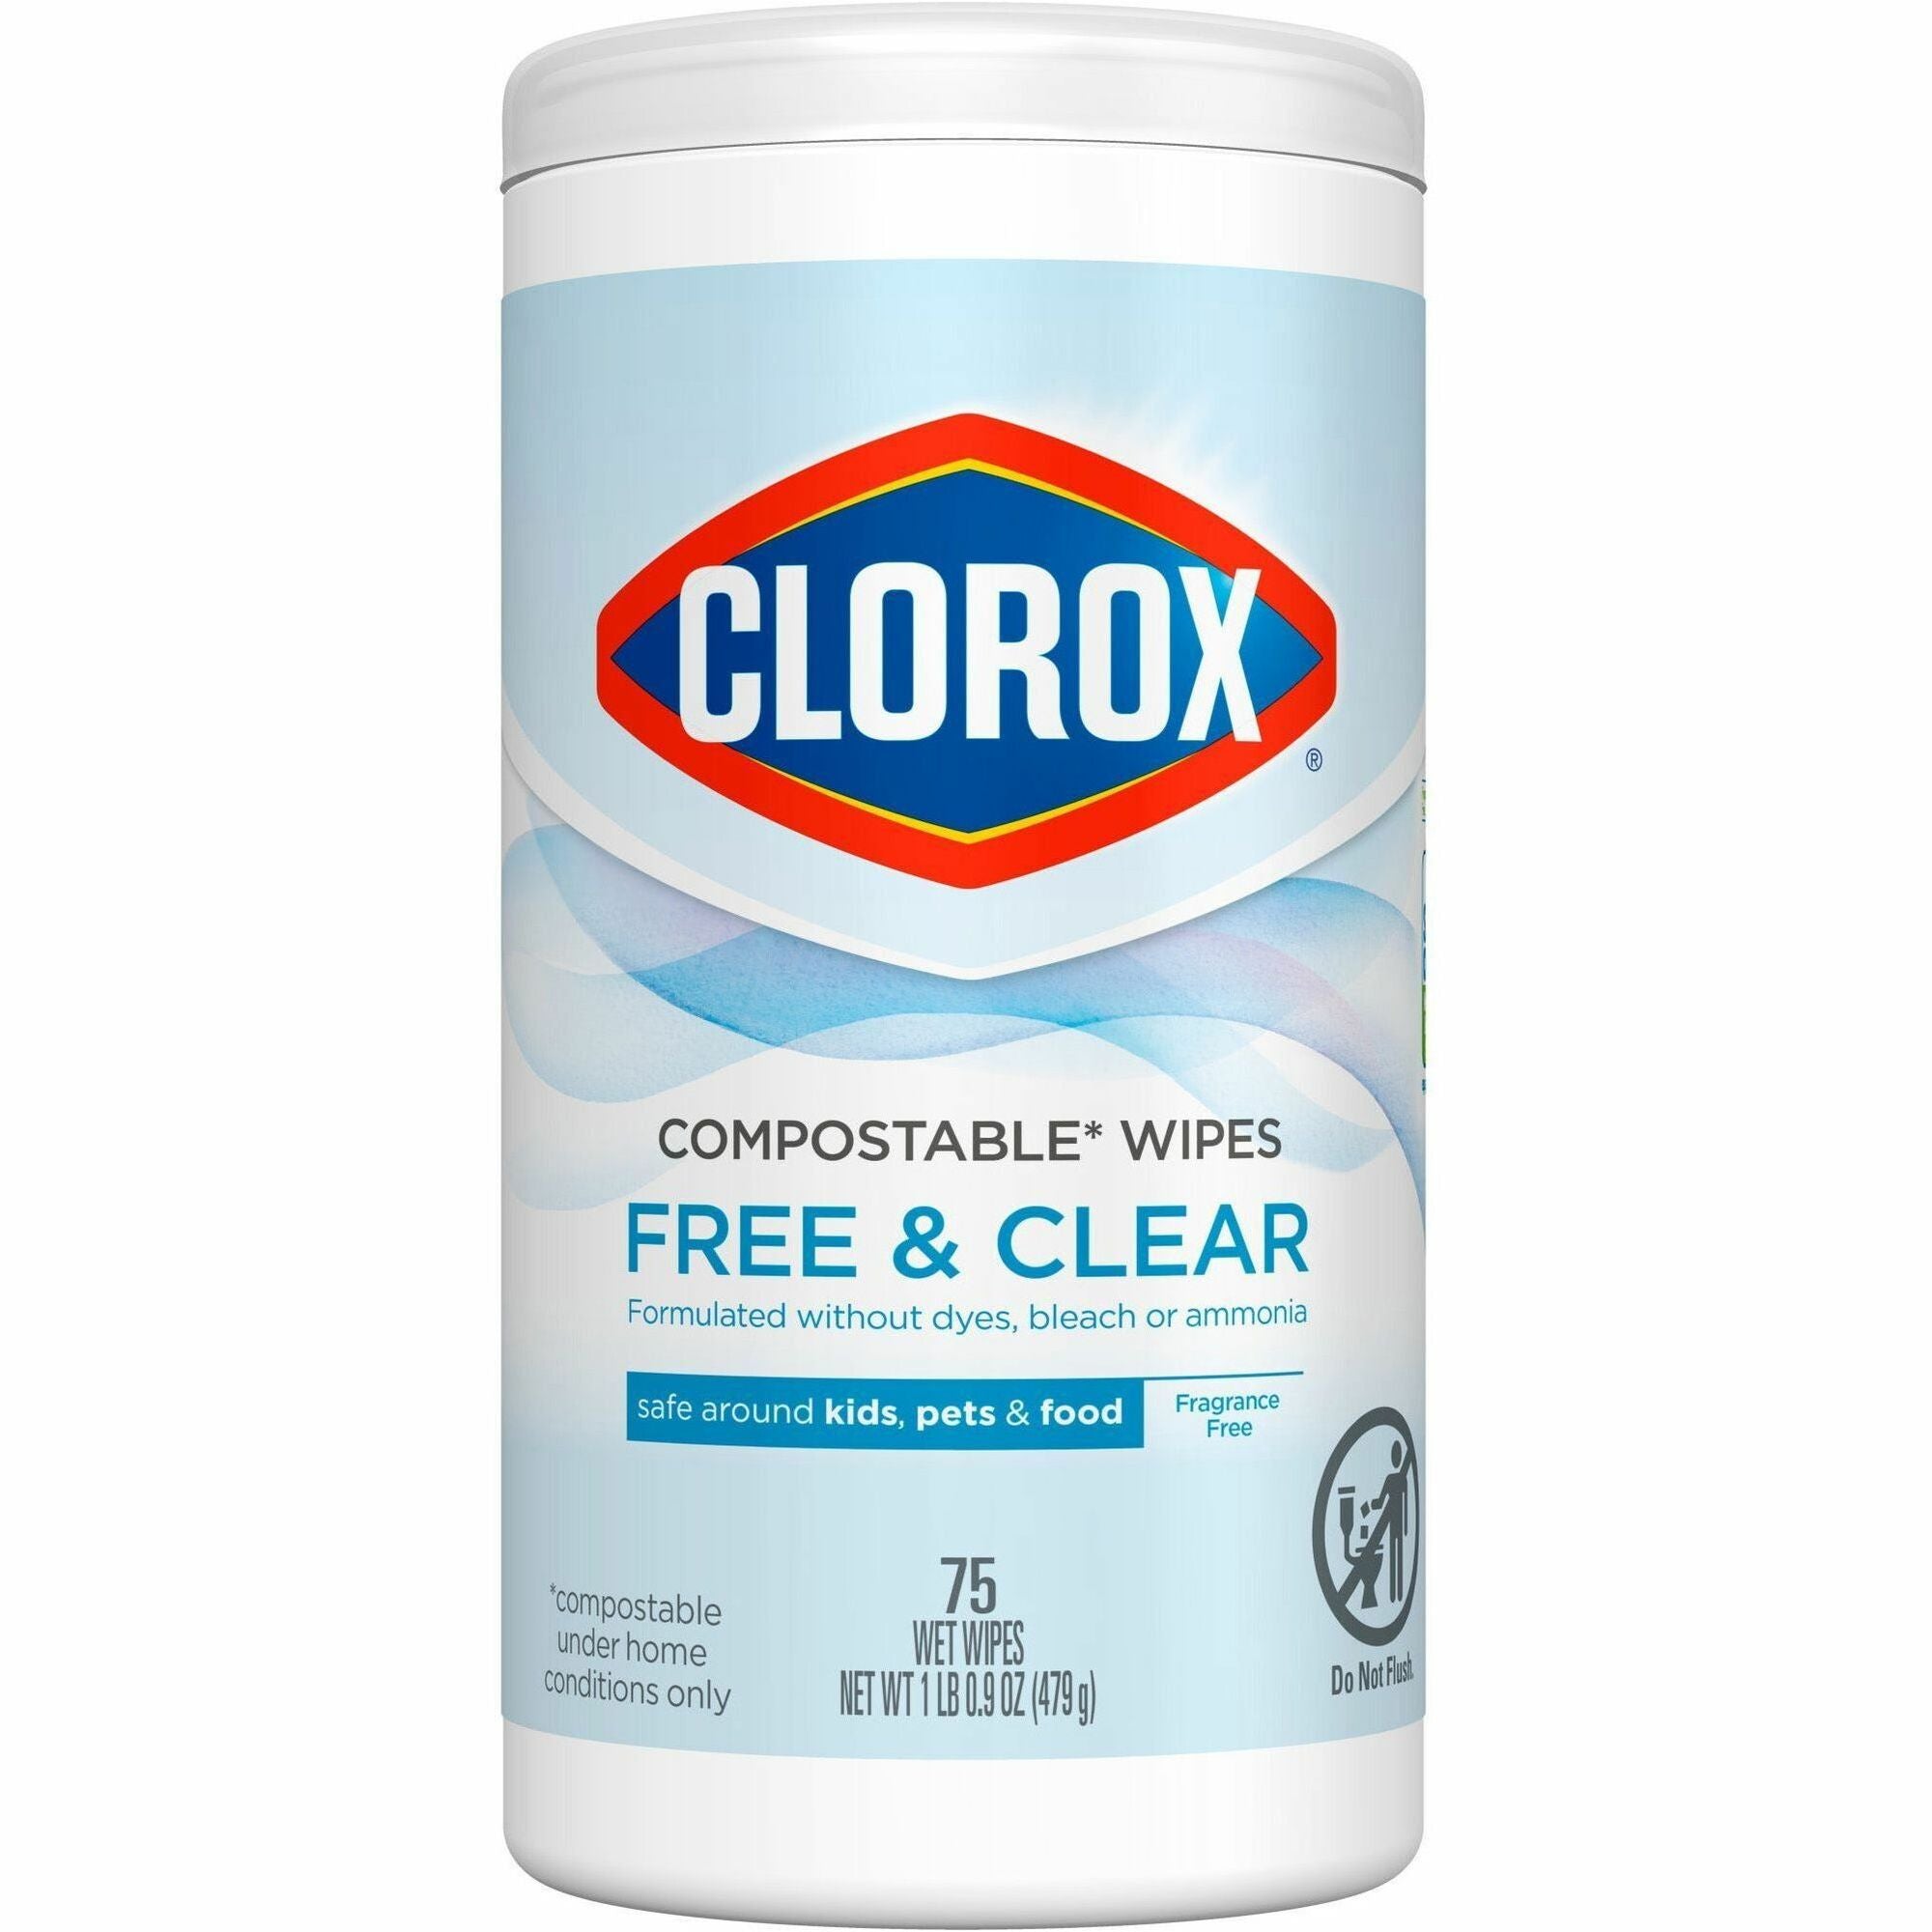 Clorox Free & Clear Compostable All Purpose Cleaning Wipes - 4.25" Length x 4.25" Width - 75.0 / Tub - 1 Each - Bleach-safe, Dye-free, Scent-free, Durable - White - 1